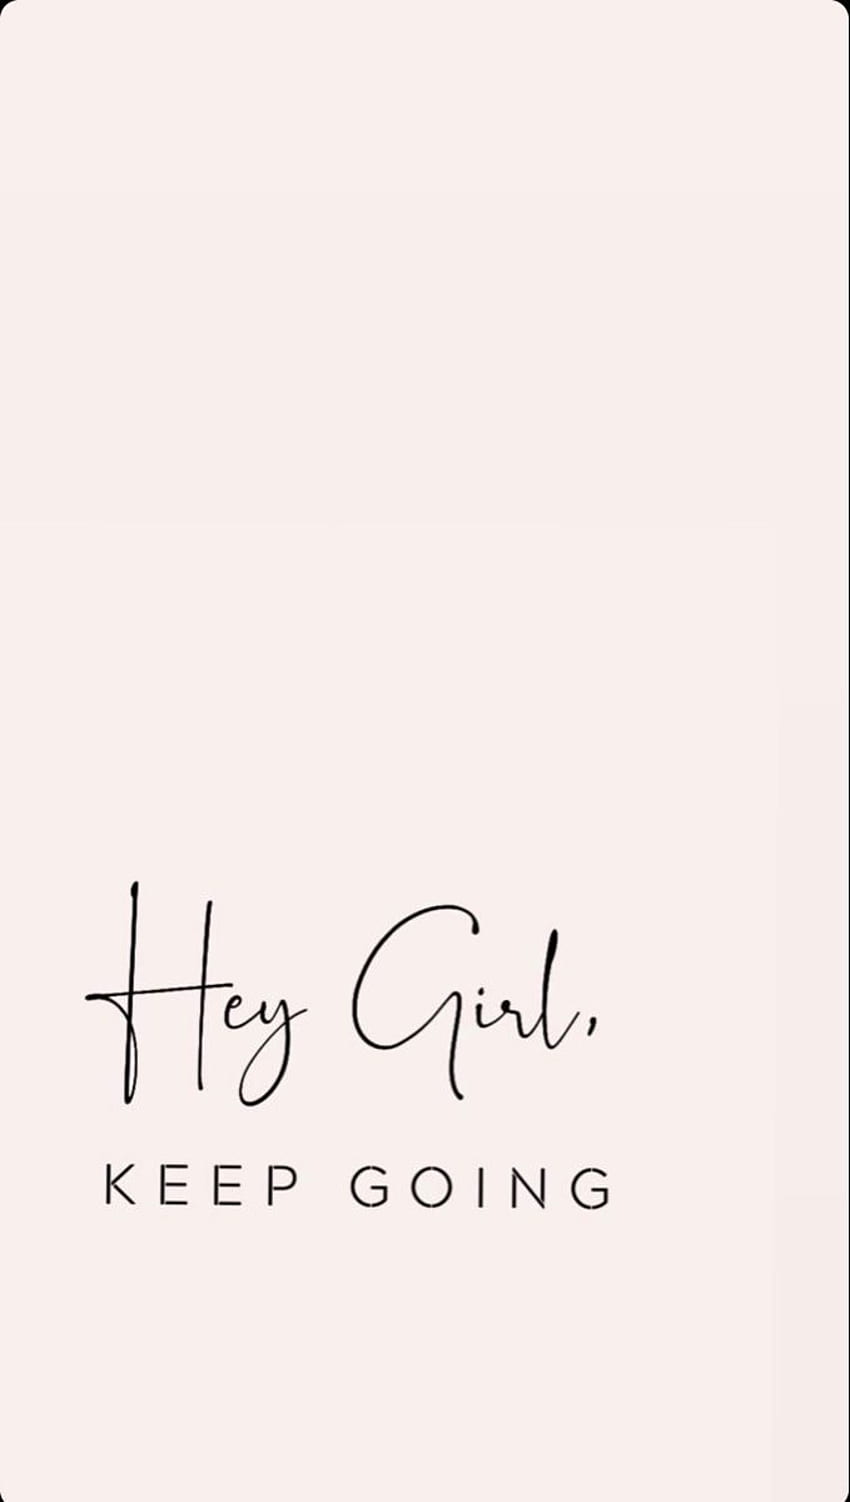 Hey girl, keep going. Feel good quotes, Positive quotes , iPhone background quote, Keep Going iPhone HD phone wallpaper